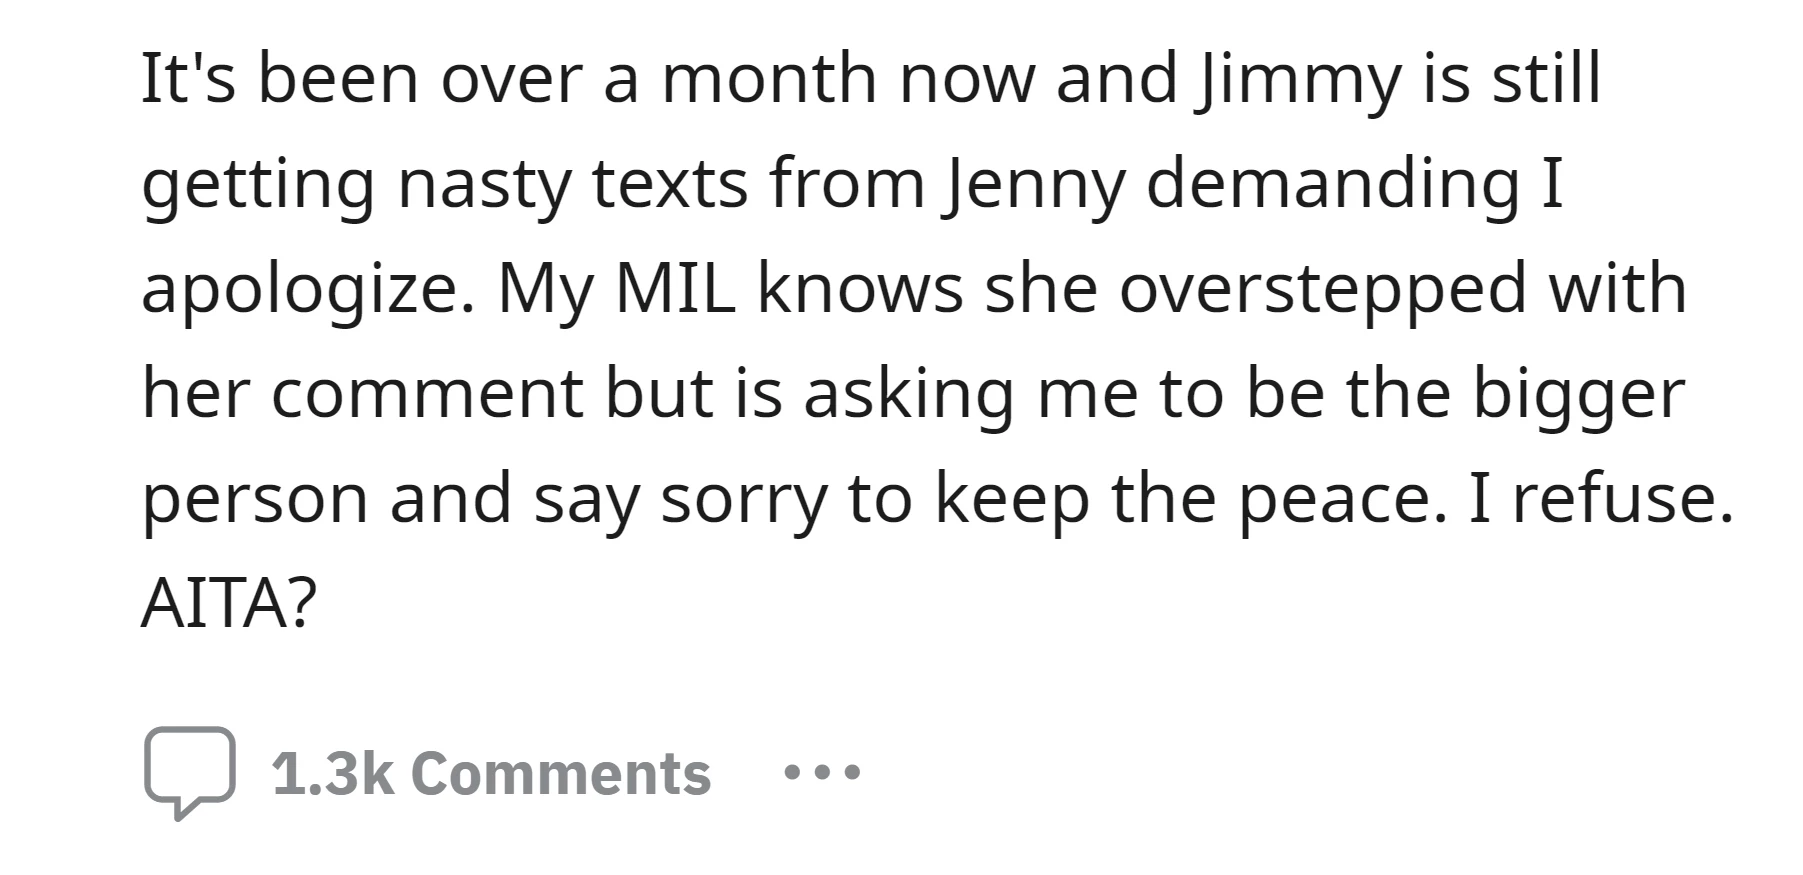 Jenny made hurtful comments about the OP's guardianship of her sister and wanted her to apologize